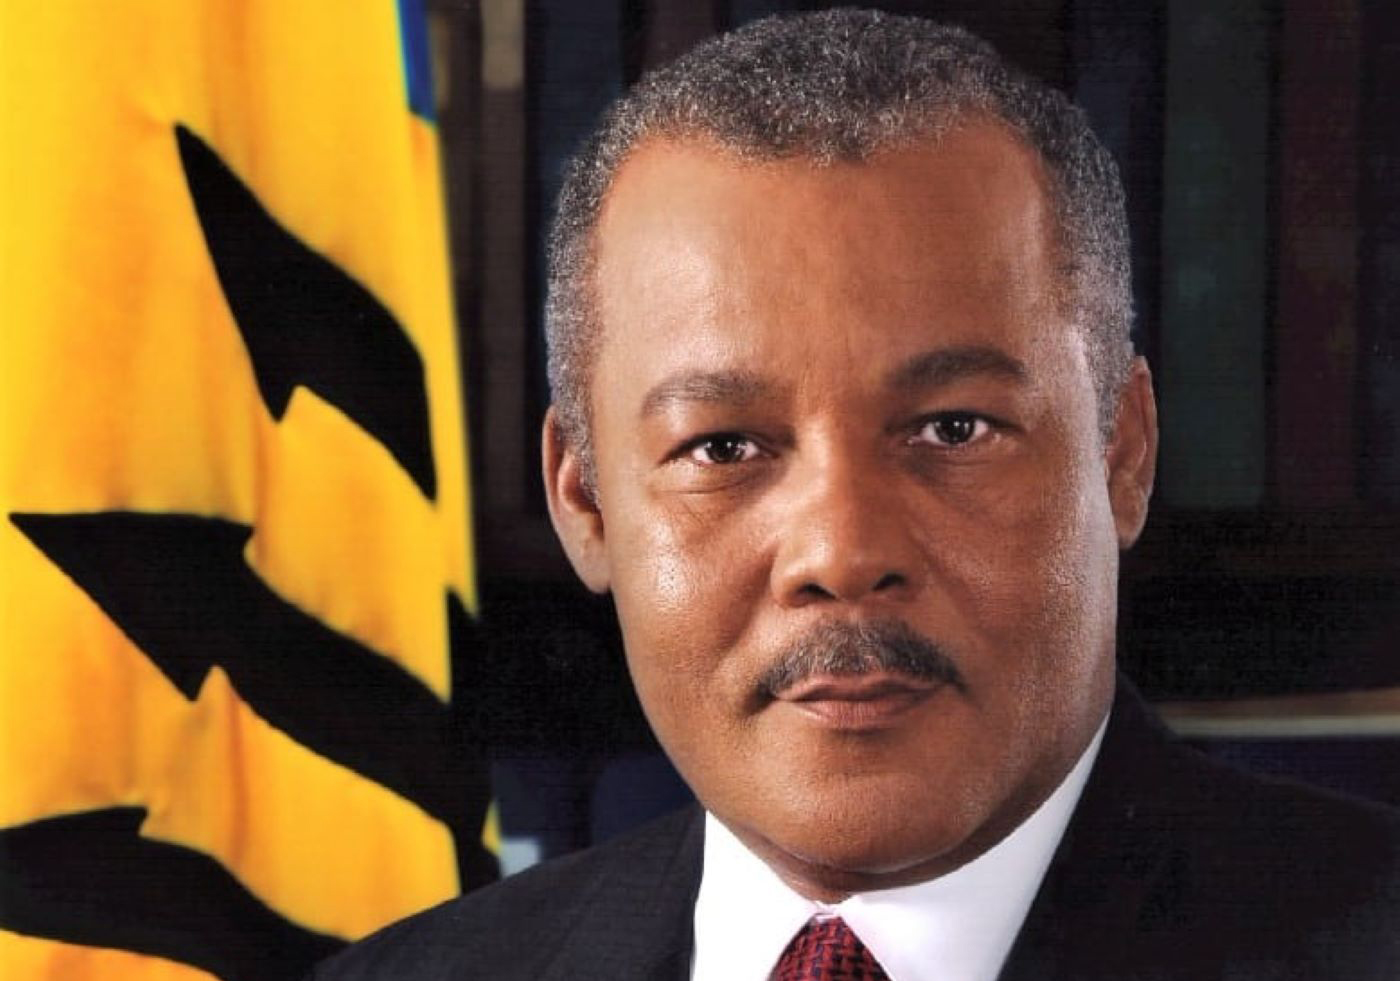 Photo of Prime Minister Owen Arthur with Barbados flag in background to left.